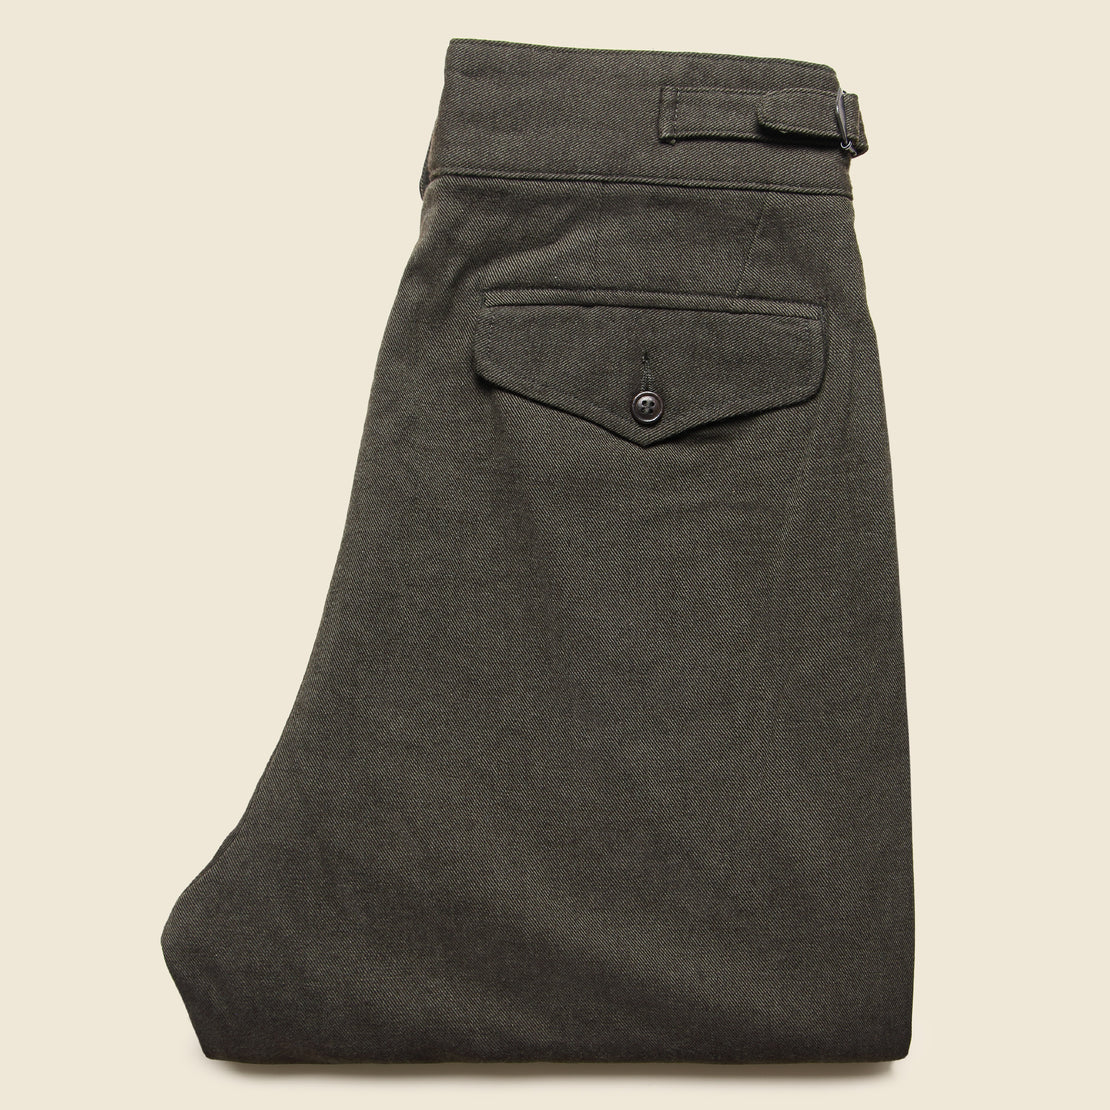 Kyle Wool Trouser - Sedona Moss - RRL - STAG Provisions - W - Pants - Twill